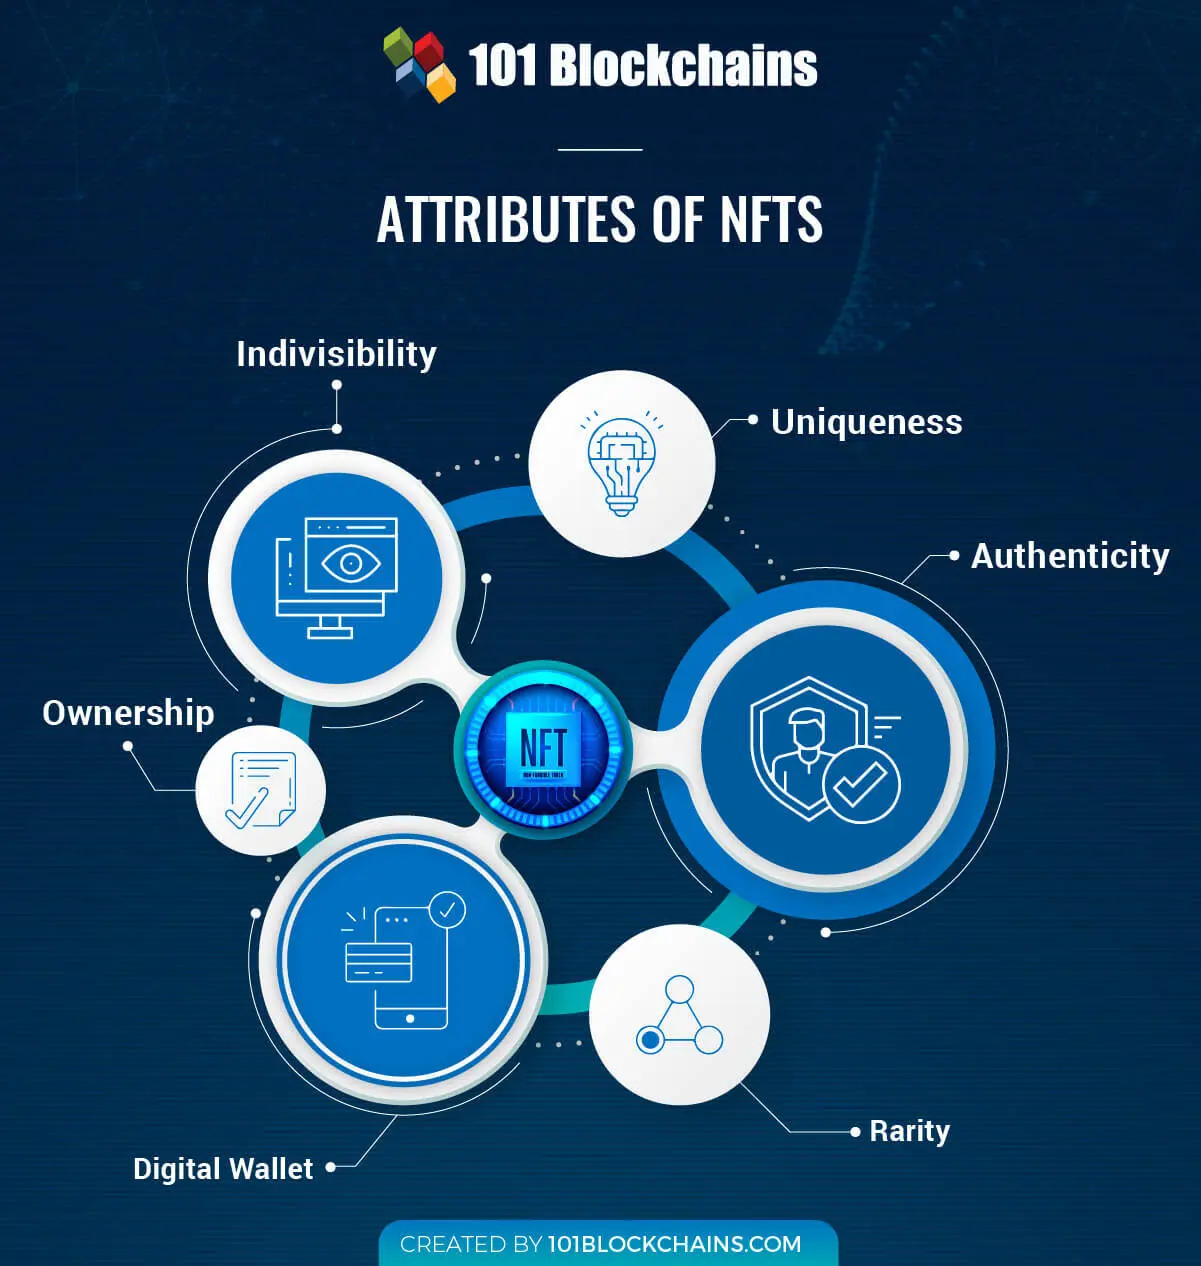 Understanding Non-Fungible Tokens (NFTs)